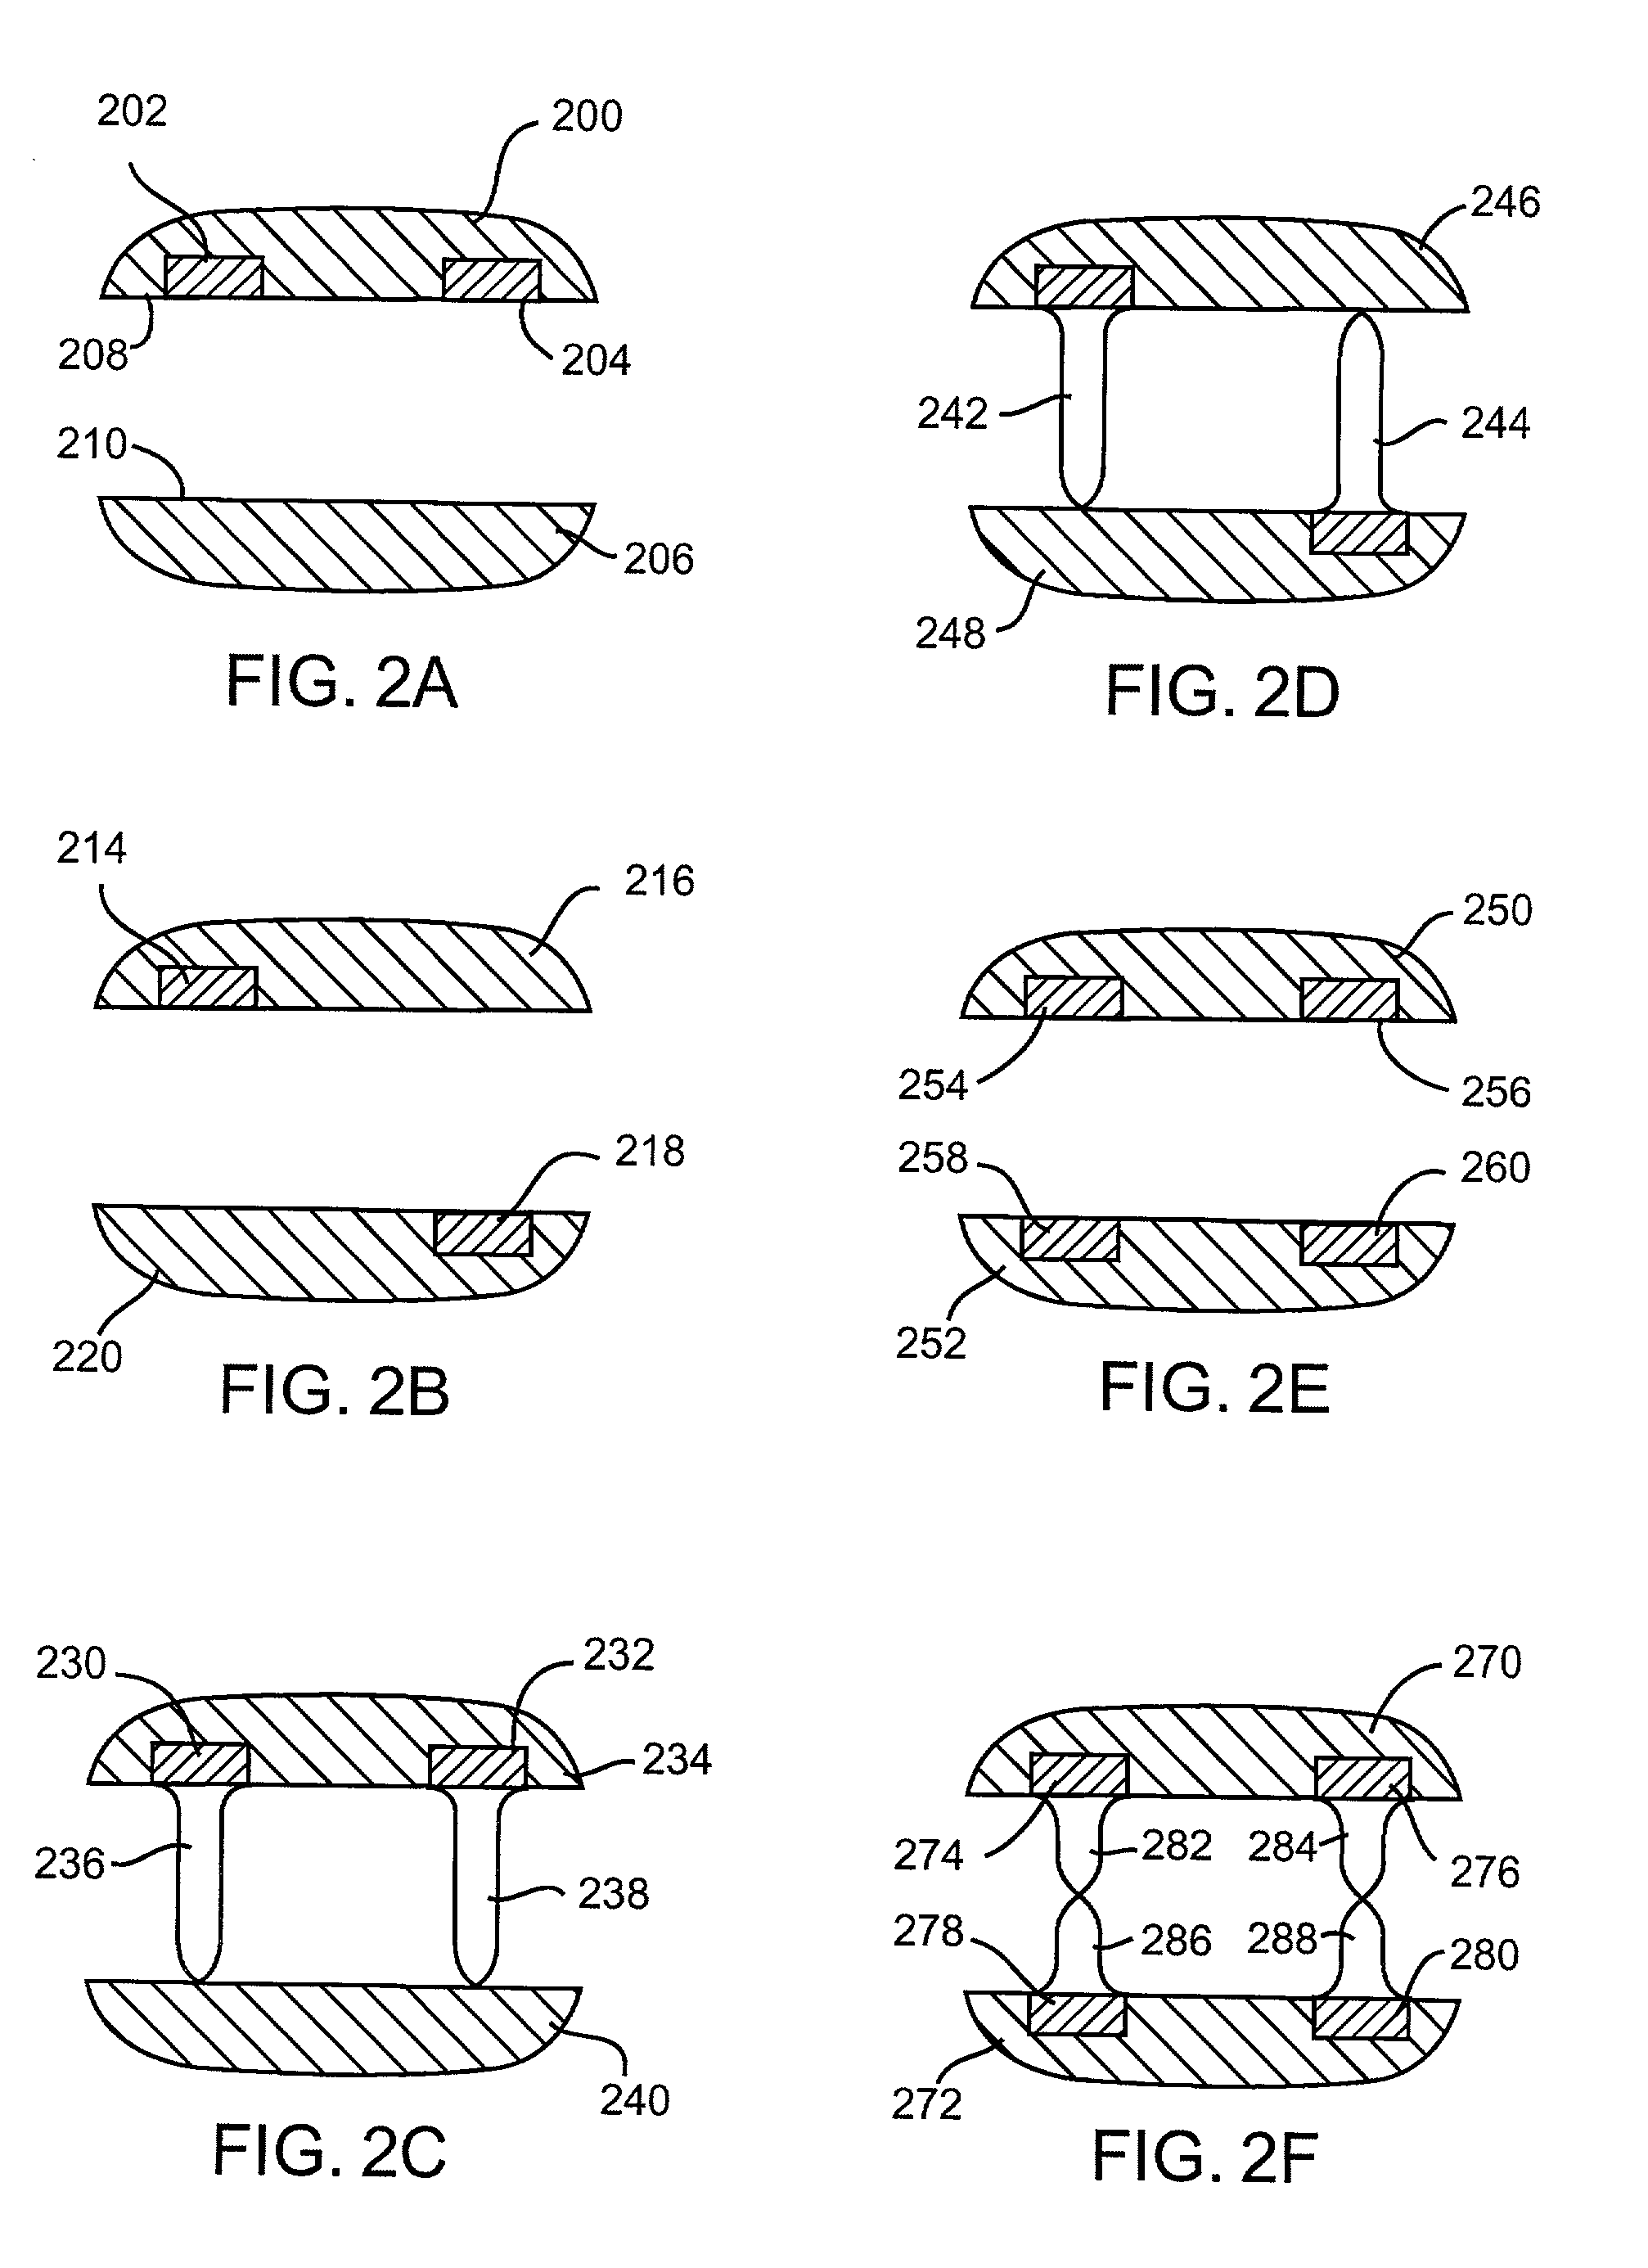 Bipolar surgical instruments having focused electrical fields